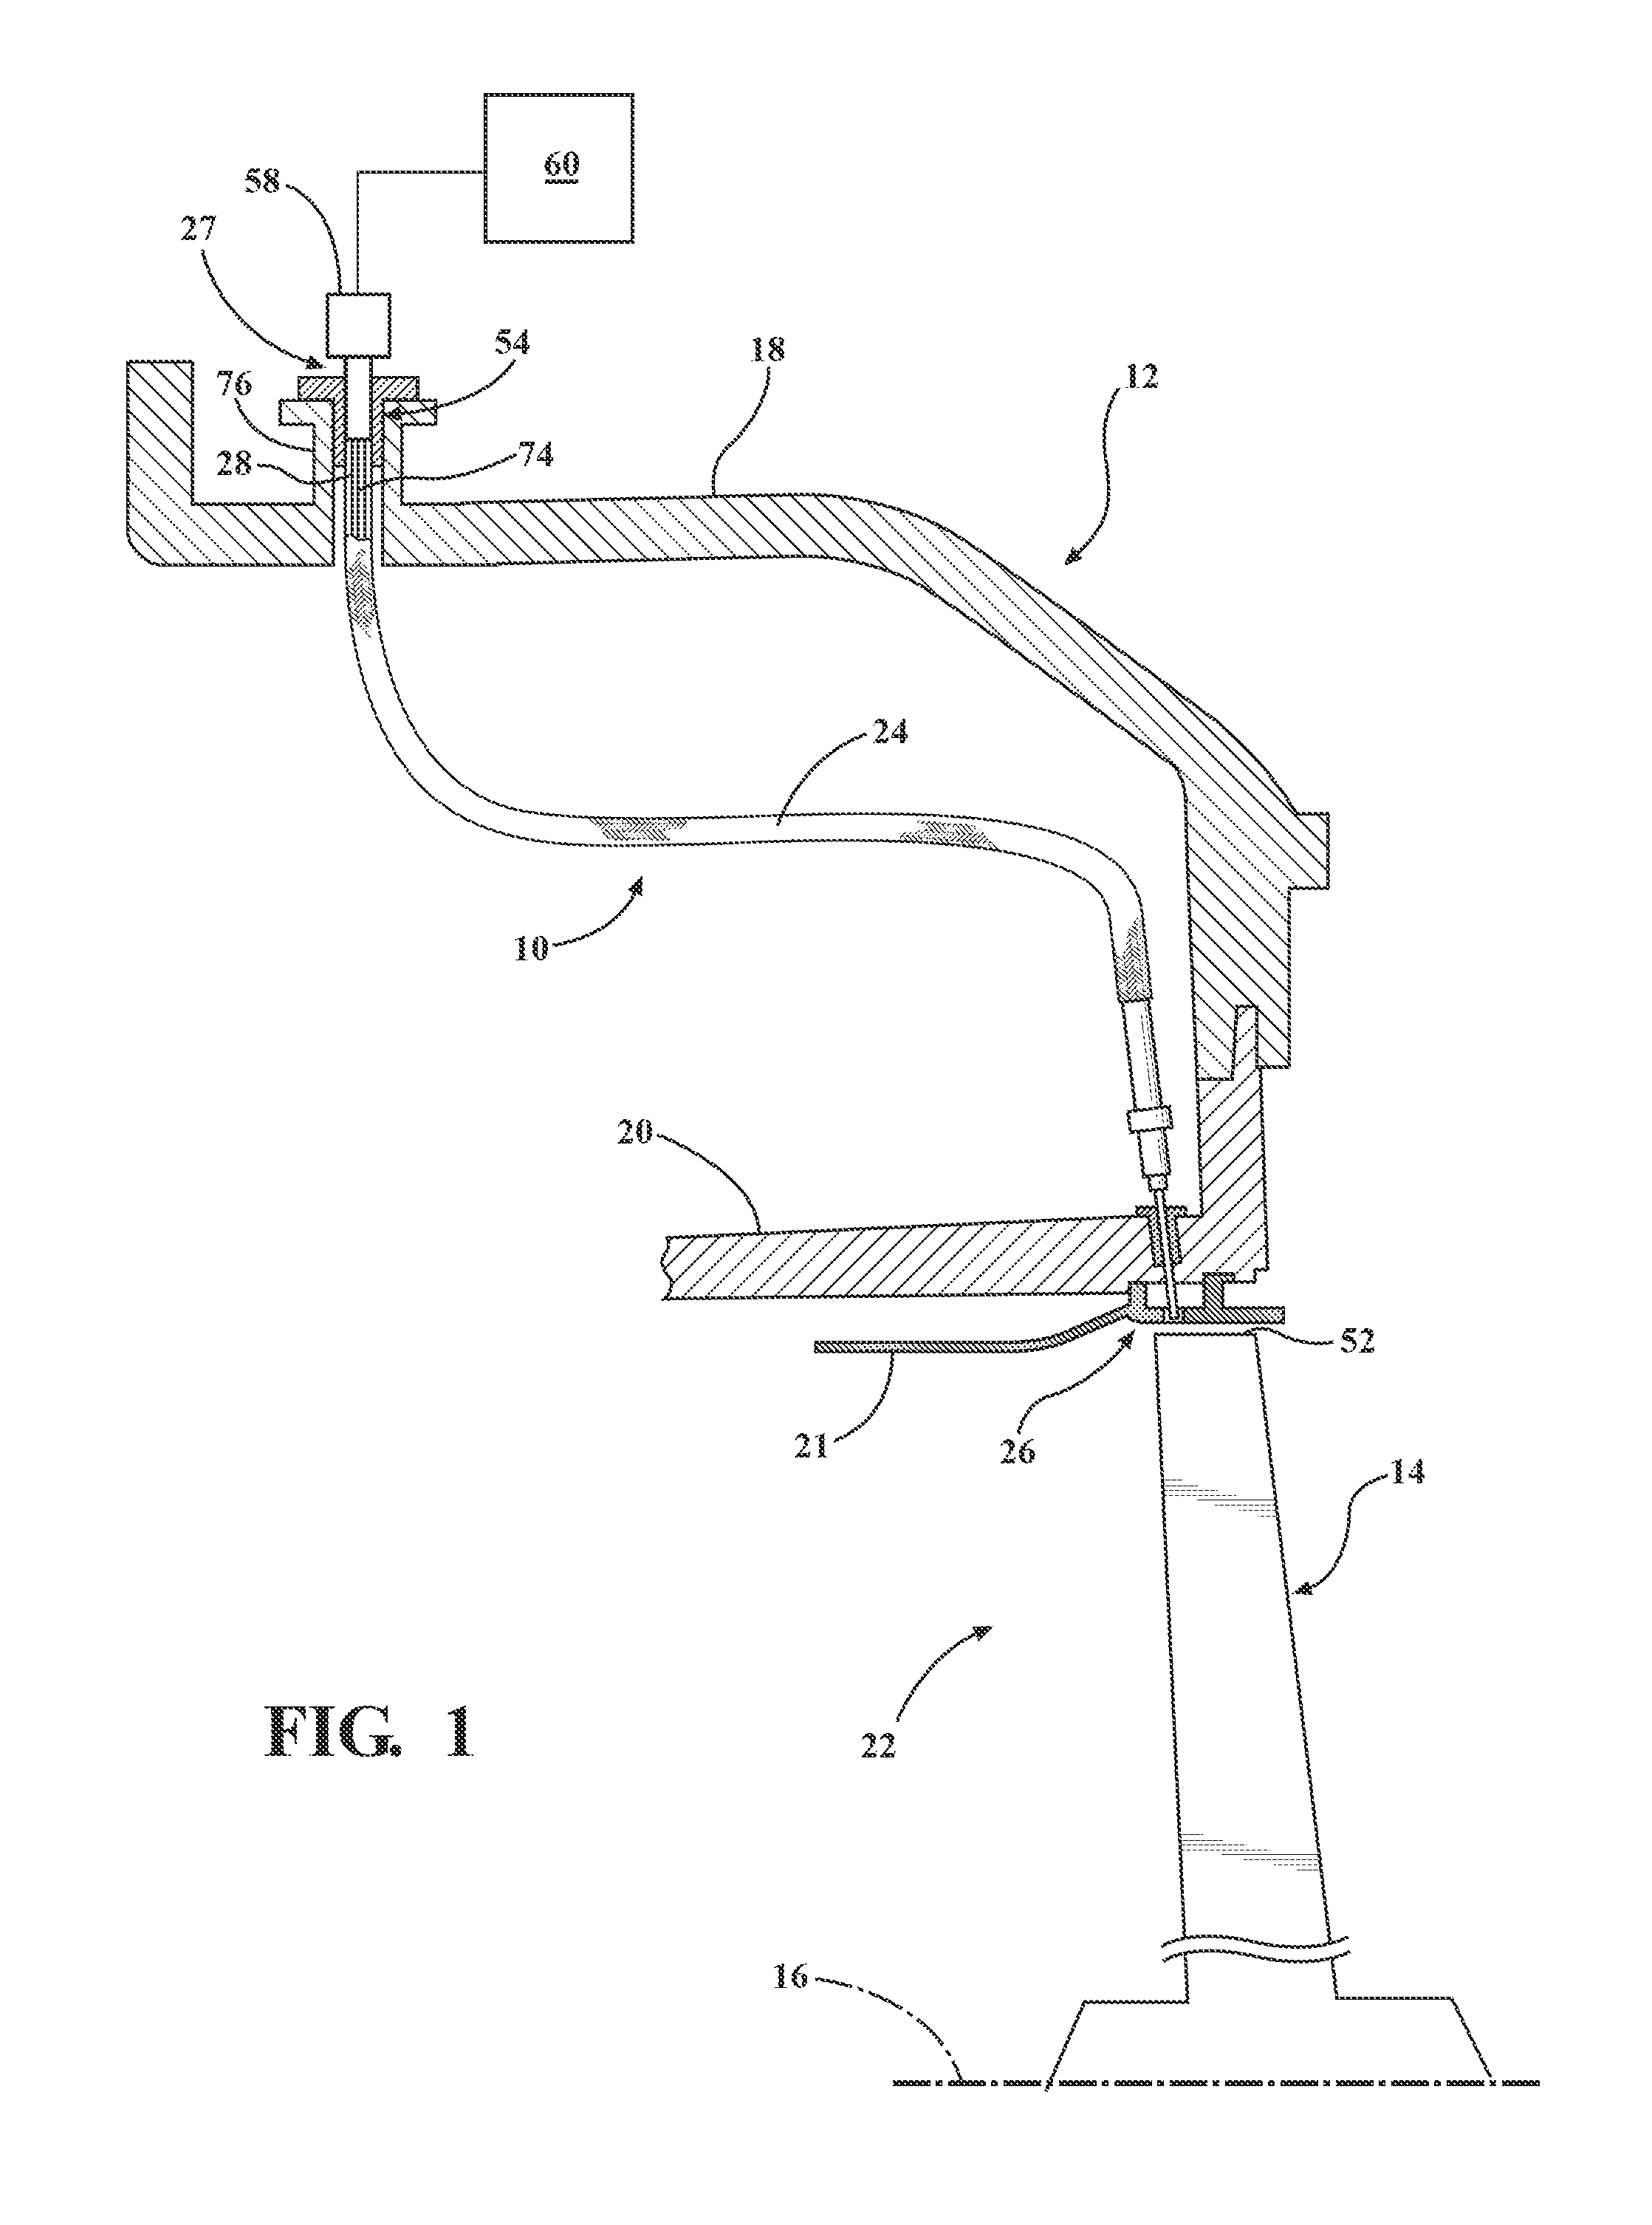 Method of determining the location of tip timing sensors during operation